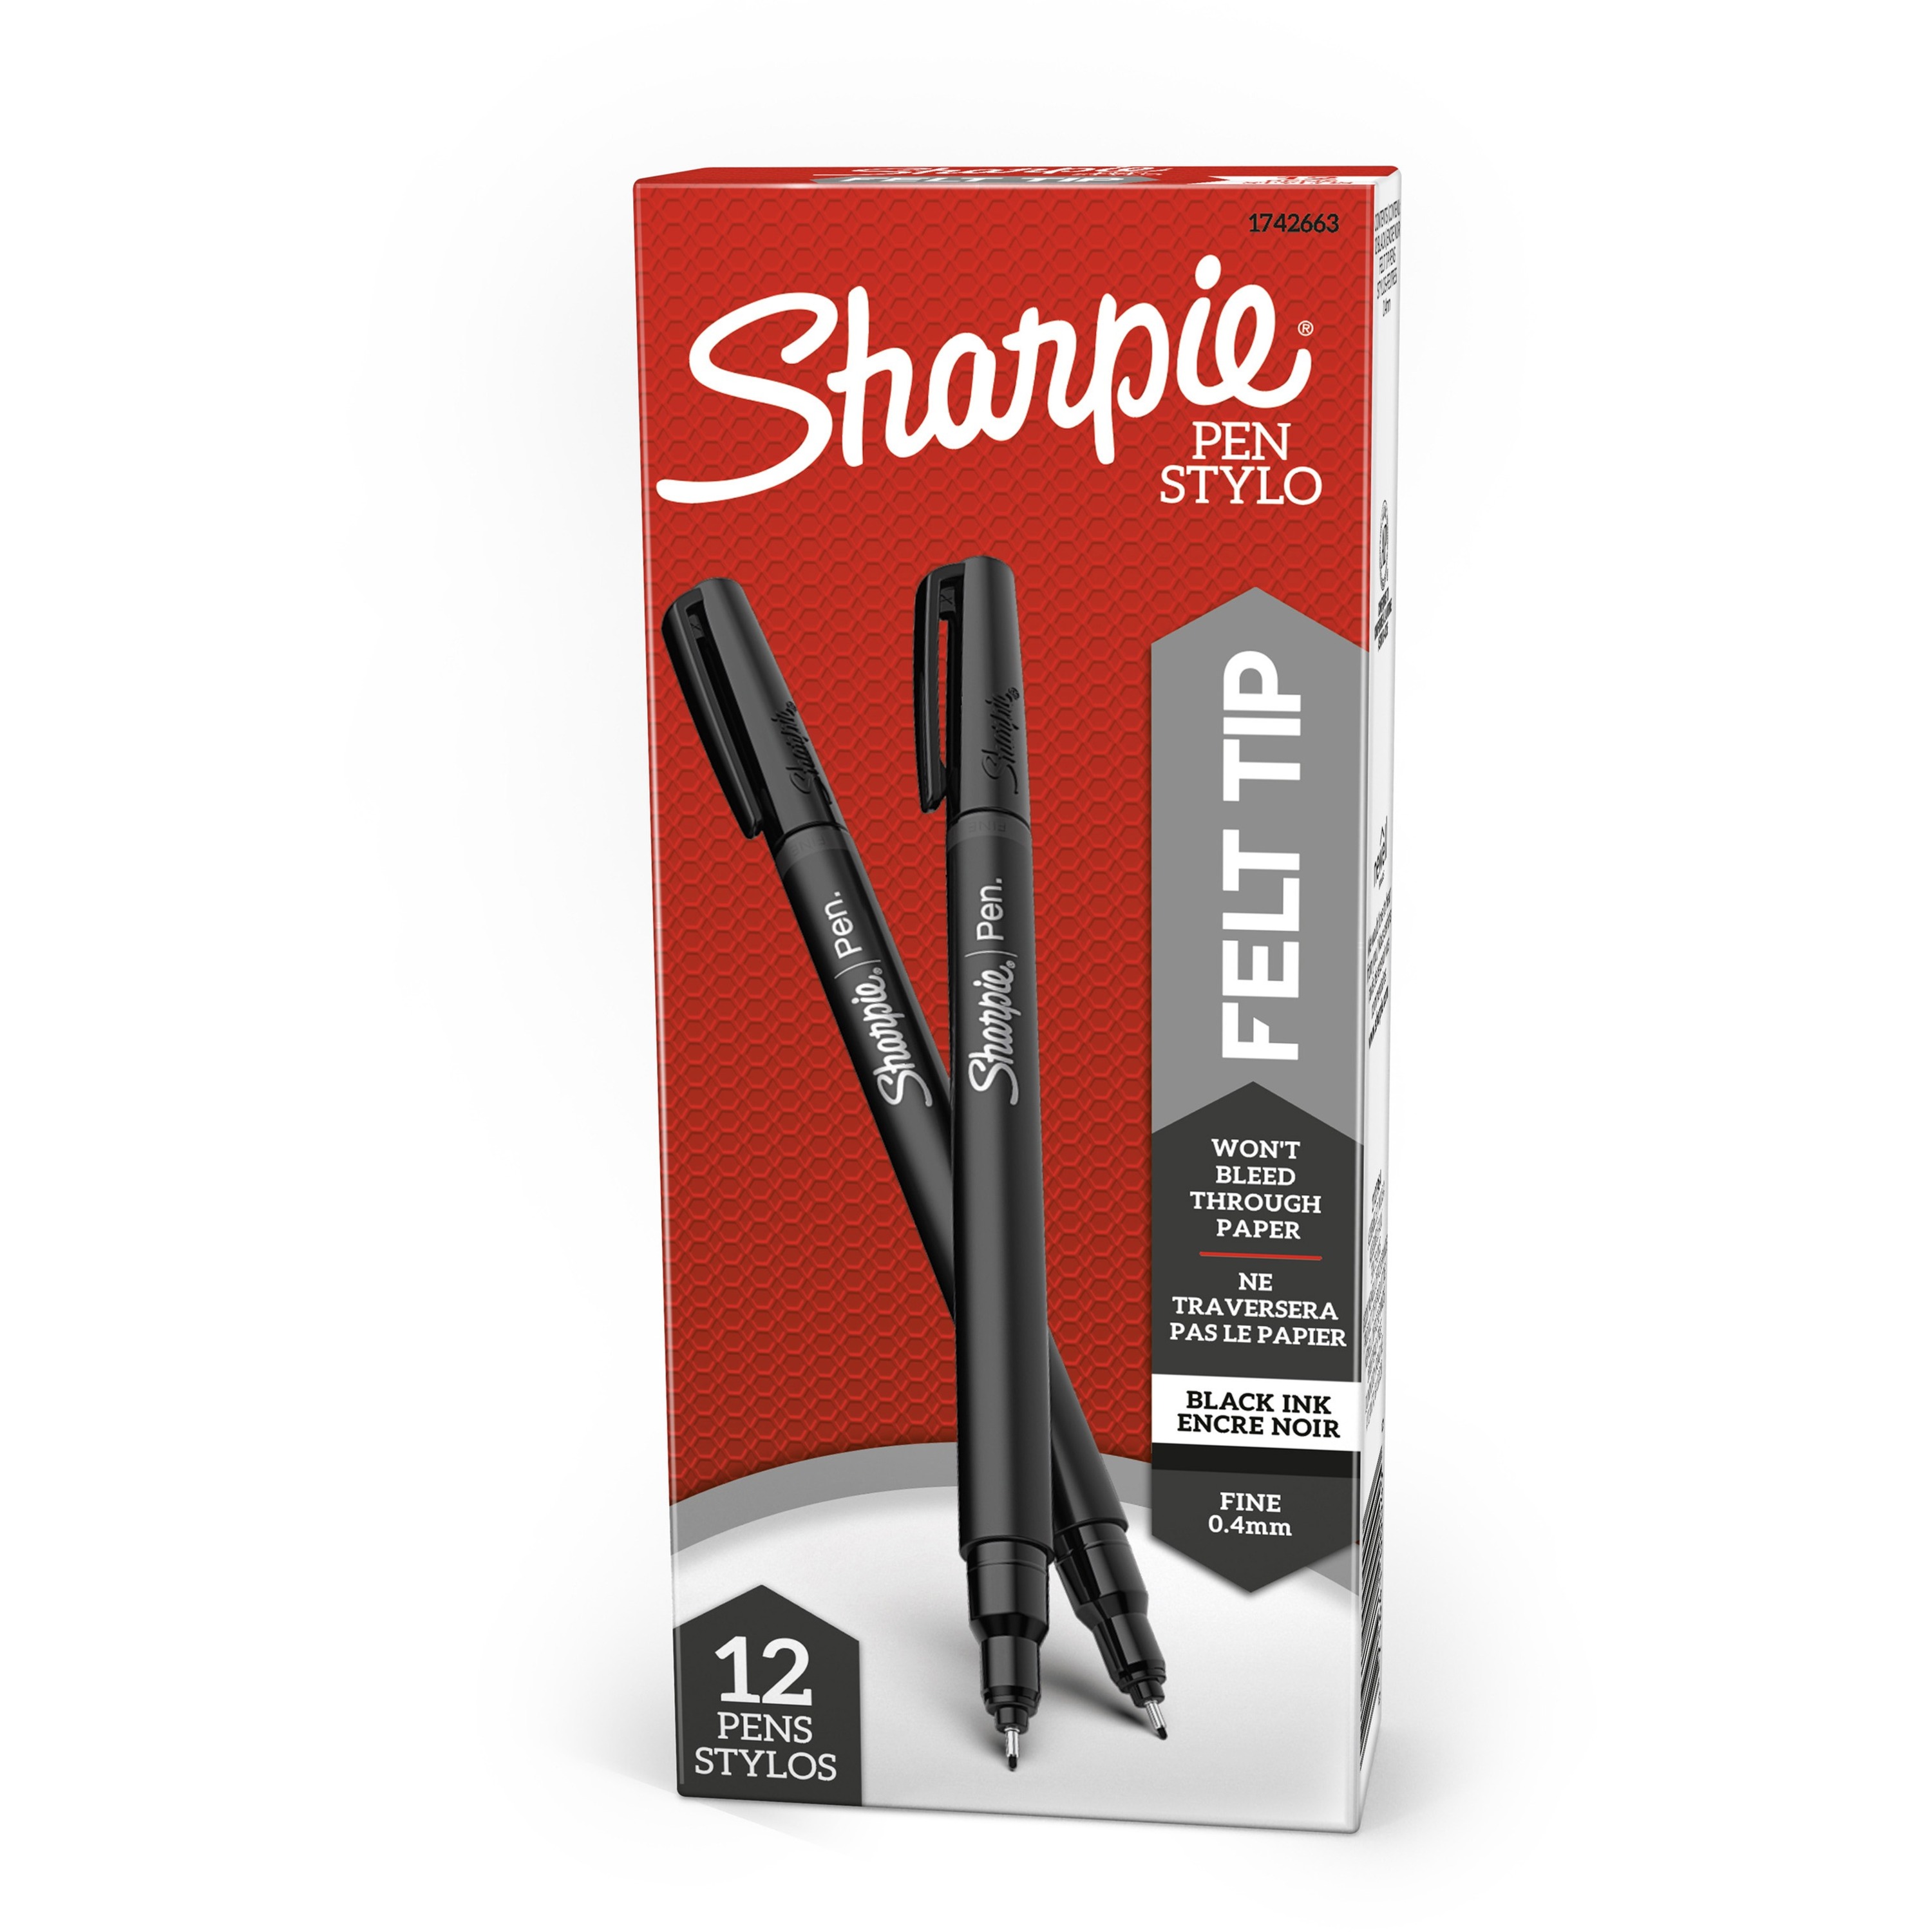 12 pack of Sharpie Fine Point markers for $1.50 + free shipping 